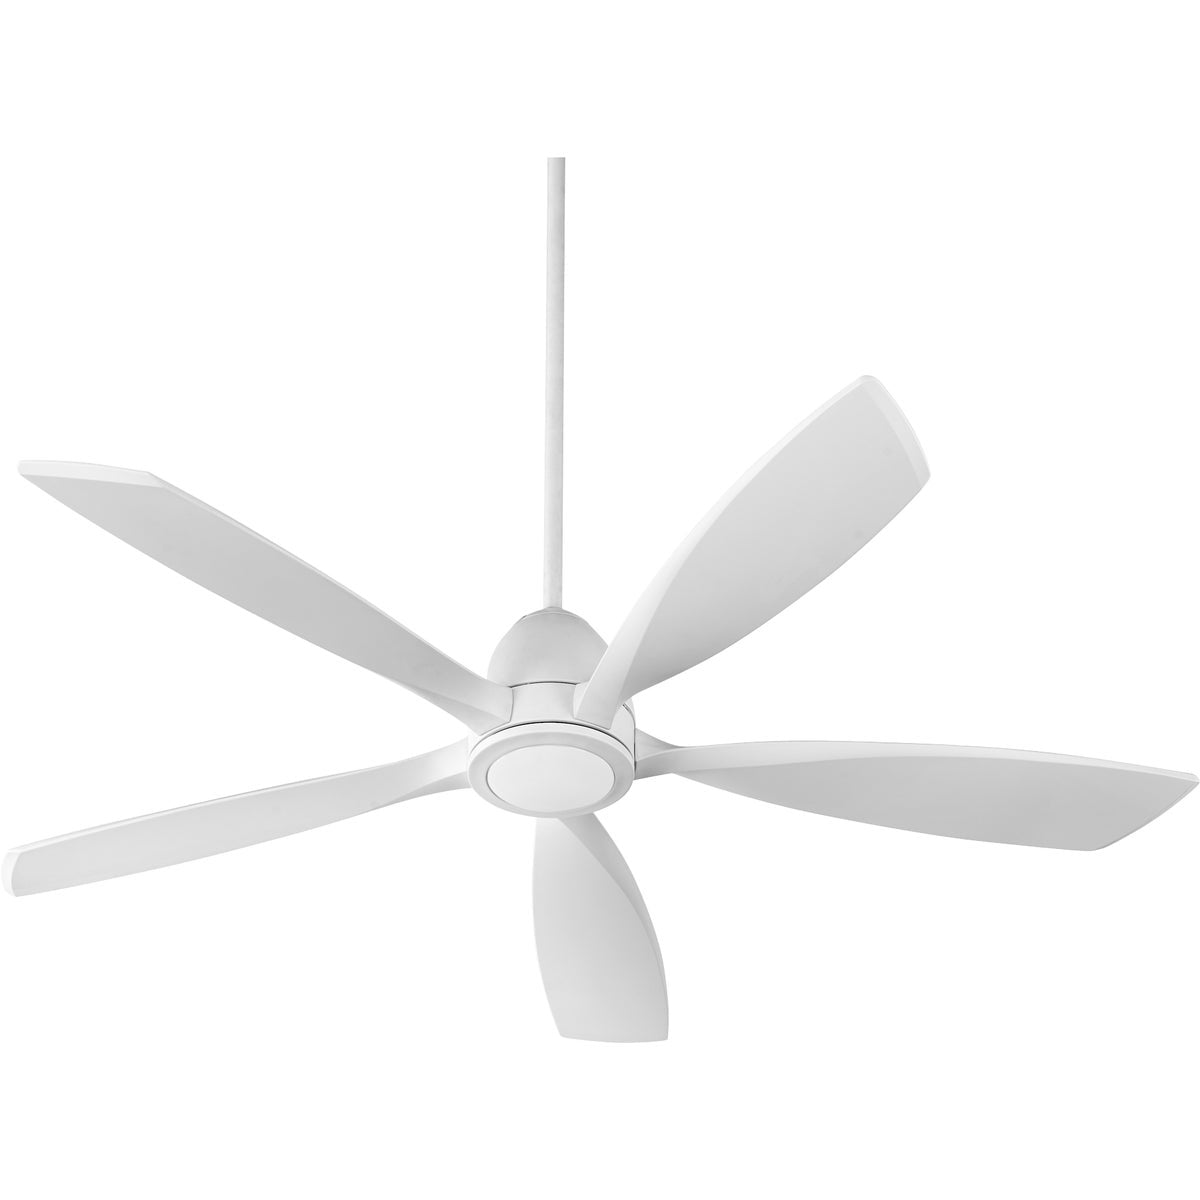 A contemporary ceiling fan with integrated LED lighting, featuring a 16-degree blade pitch and 6-speed DC motor. Dimensions: 13.5"H x 56"W.